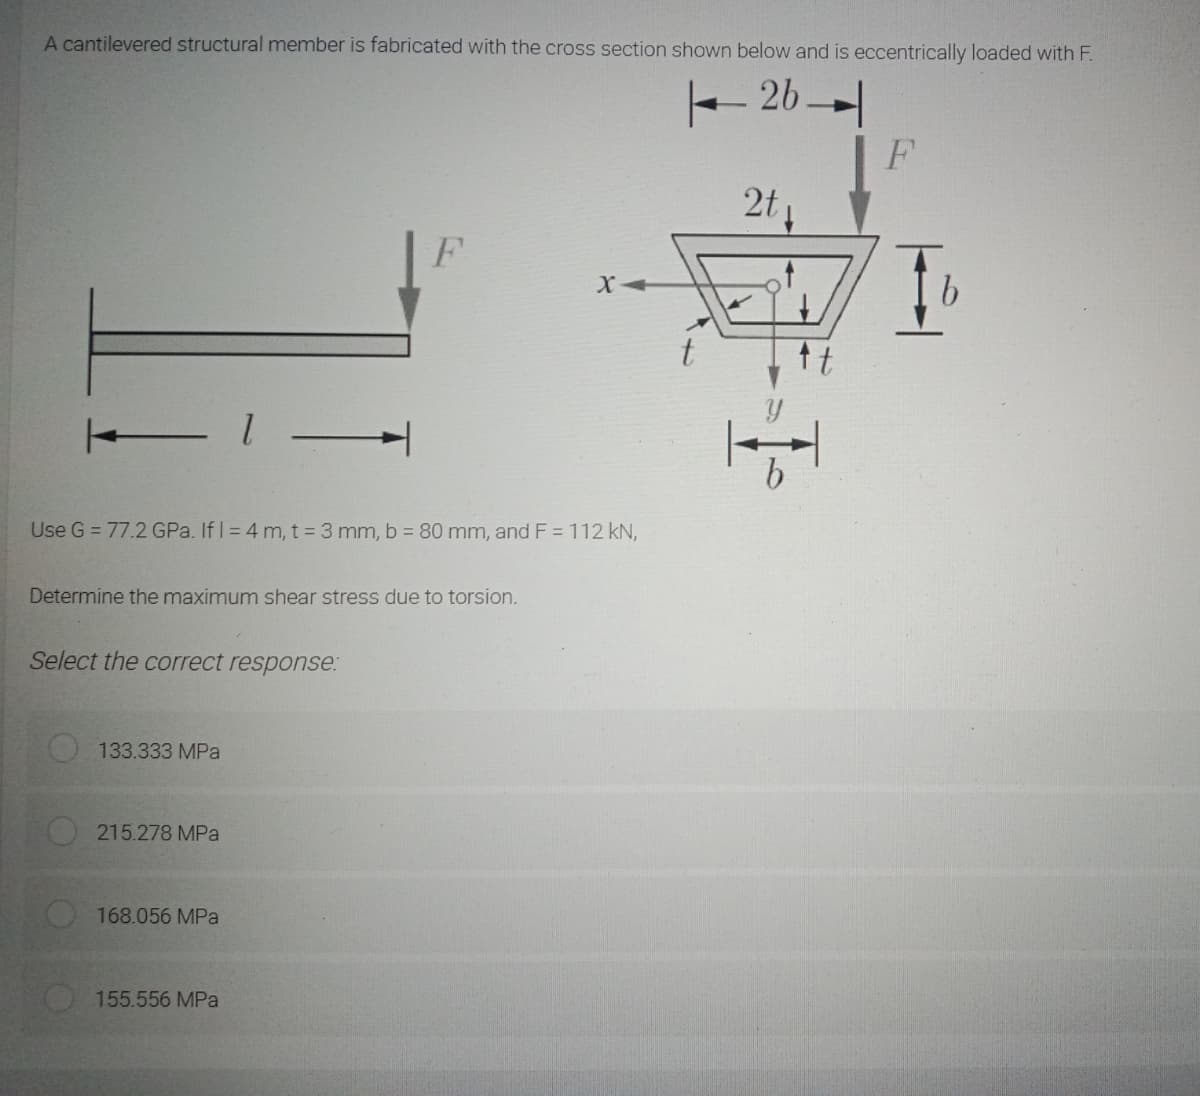 A cantilevered structural member is fabricated with the cross section shown below and is eccentrically loaded with F.
- 26 -
2t
F
Use G = 77.2 GPa. If I = 4 m, t = 3 mm, b = 80 mm, and F = 112 kN,
Determine the maximum shear stress due to torsion.
Select the correct response:
133.333 MPa
215.278 MPa
168.056 MPa
155.556 MPa
